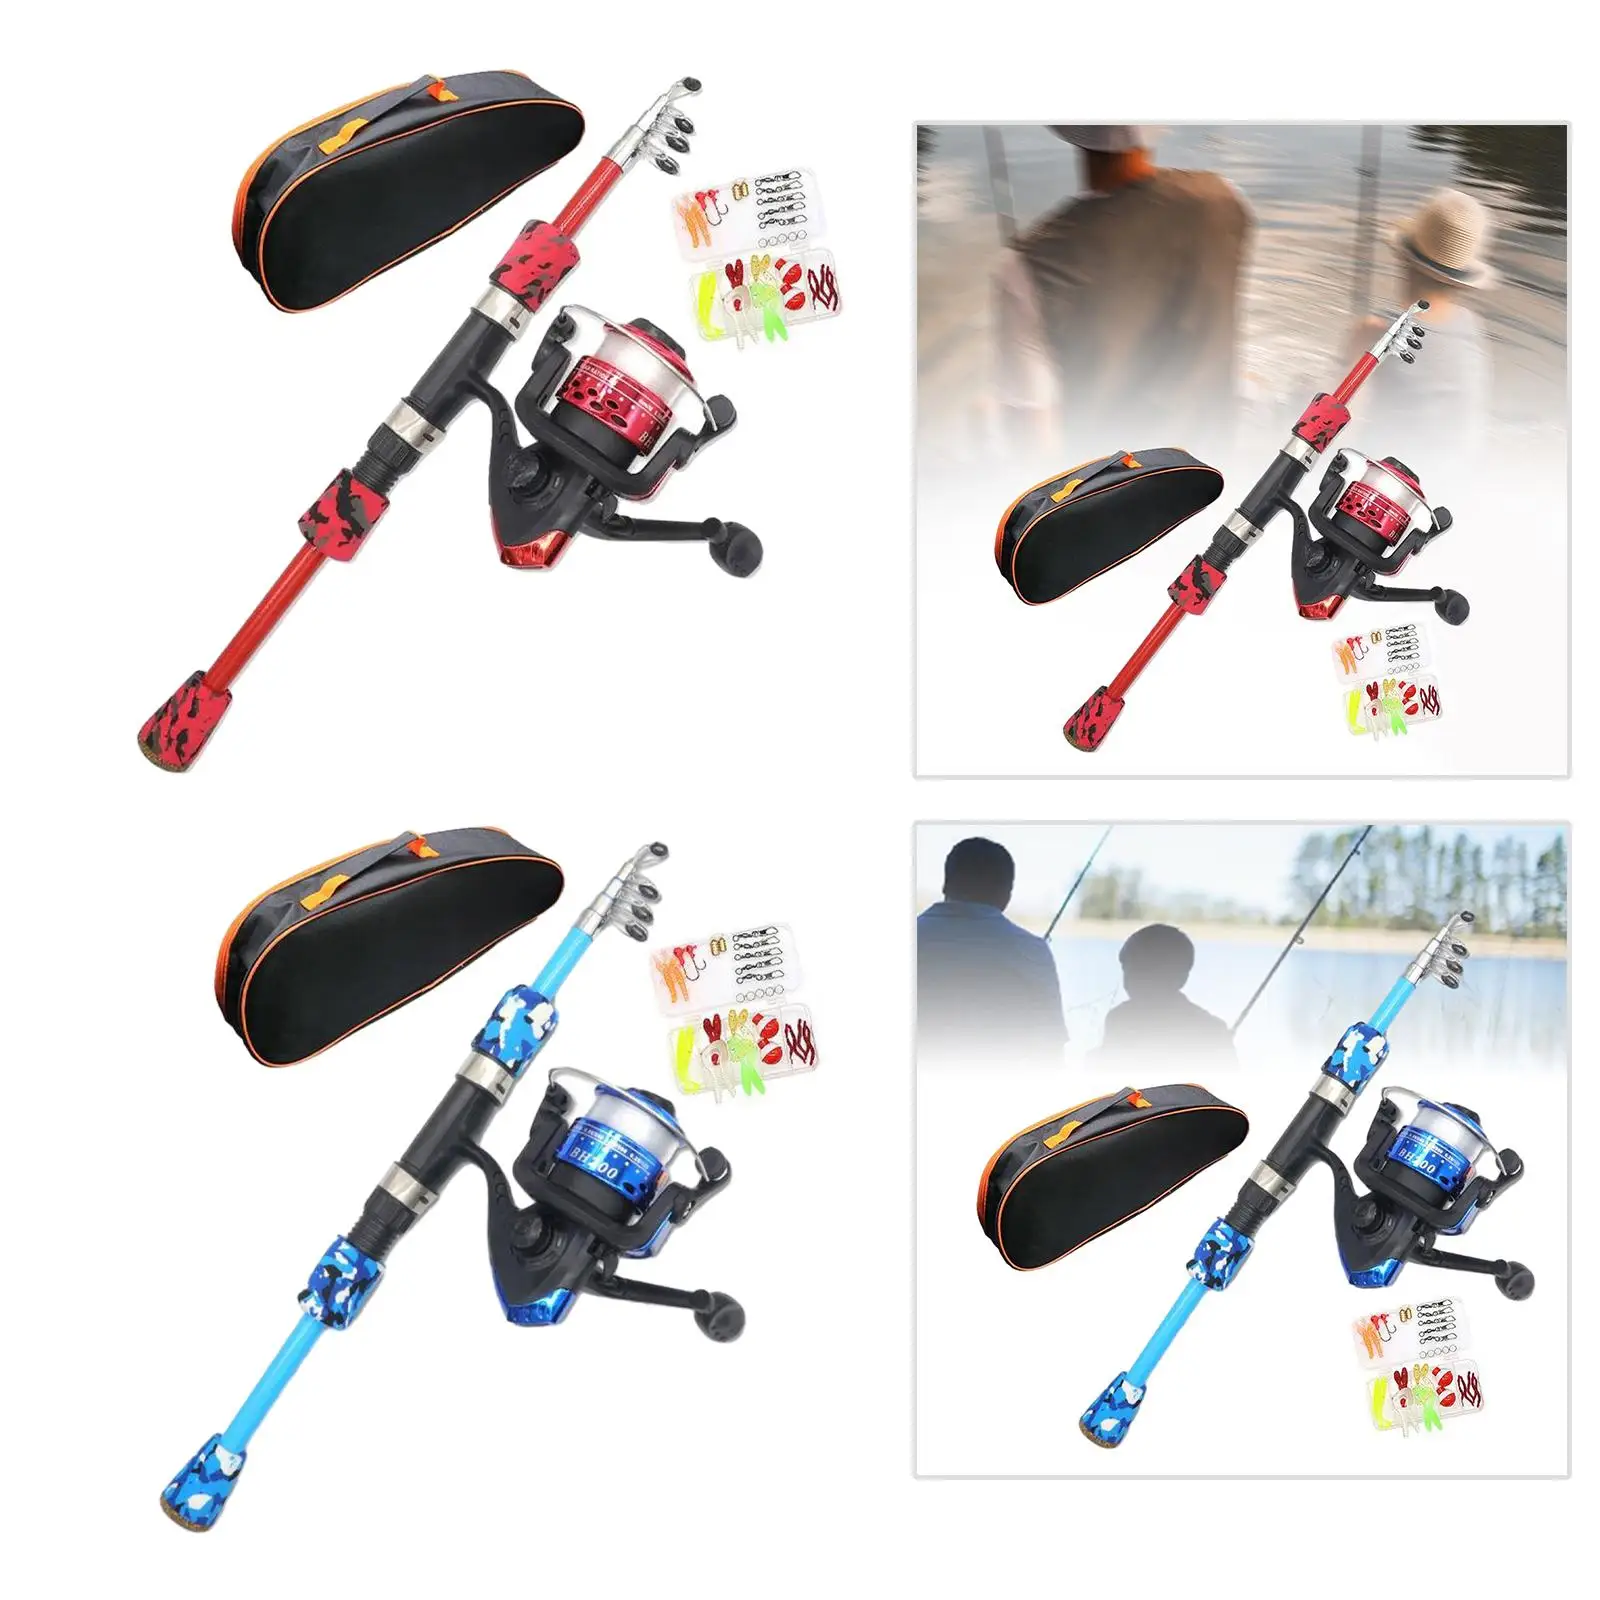 Kids Fishing Rod and Reel Combo Outdoor with Carrier Bag Complete Fishing Rod Set for Starter Beginners Children Birthday Gifts